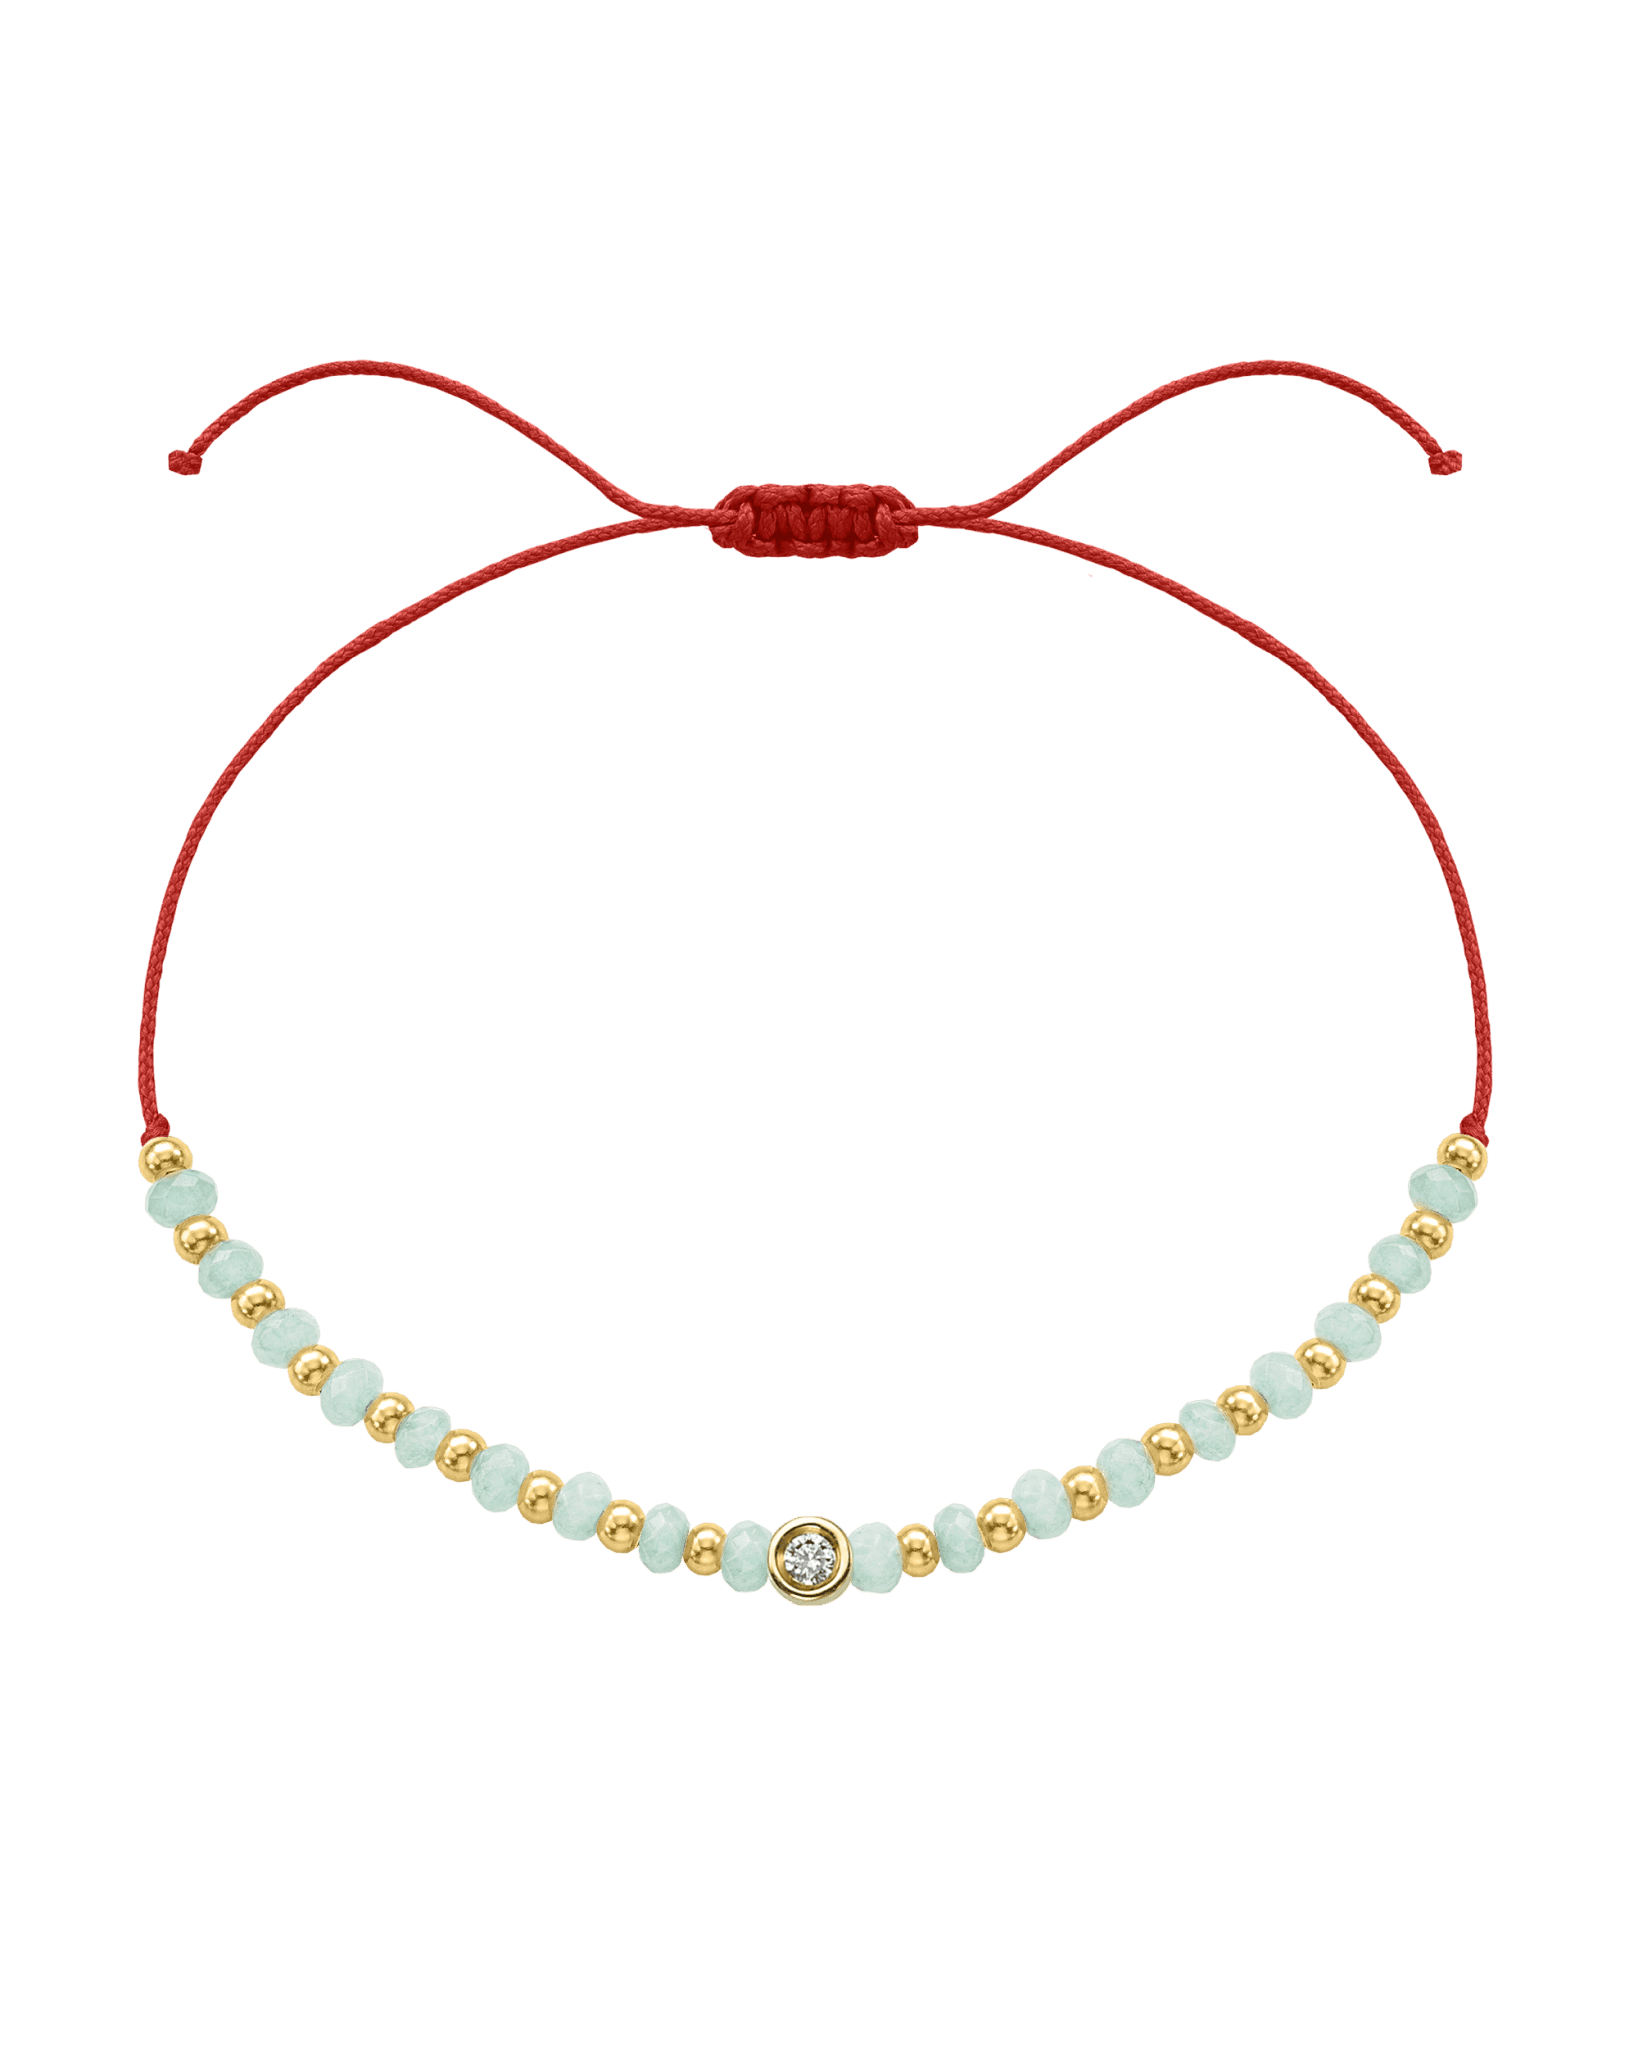 Apatite Gemstone String of Love Bracelet for Inspiration - 14K Yellow Gold Bracelets 14K Solid Gold Red Small: 0.03ct 